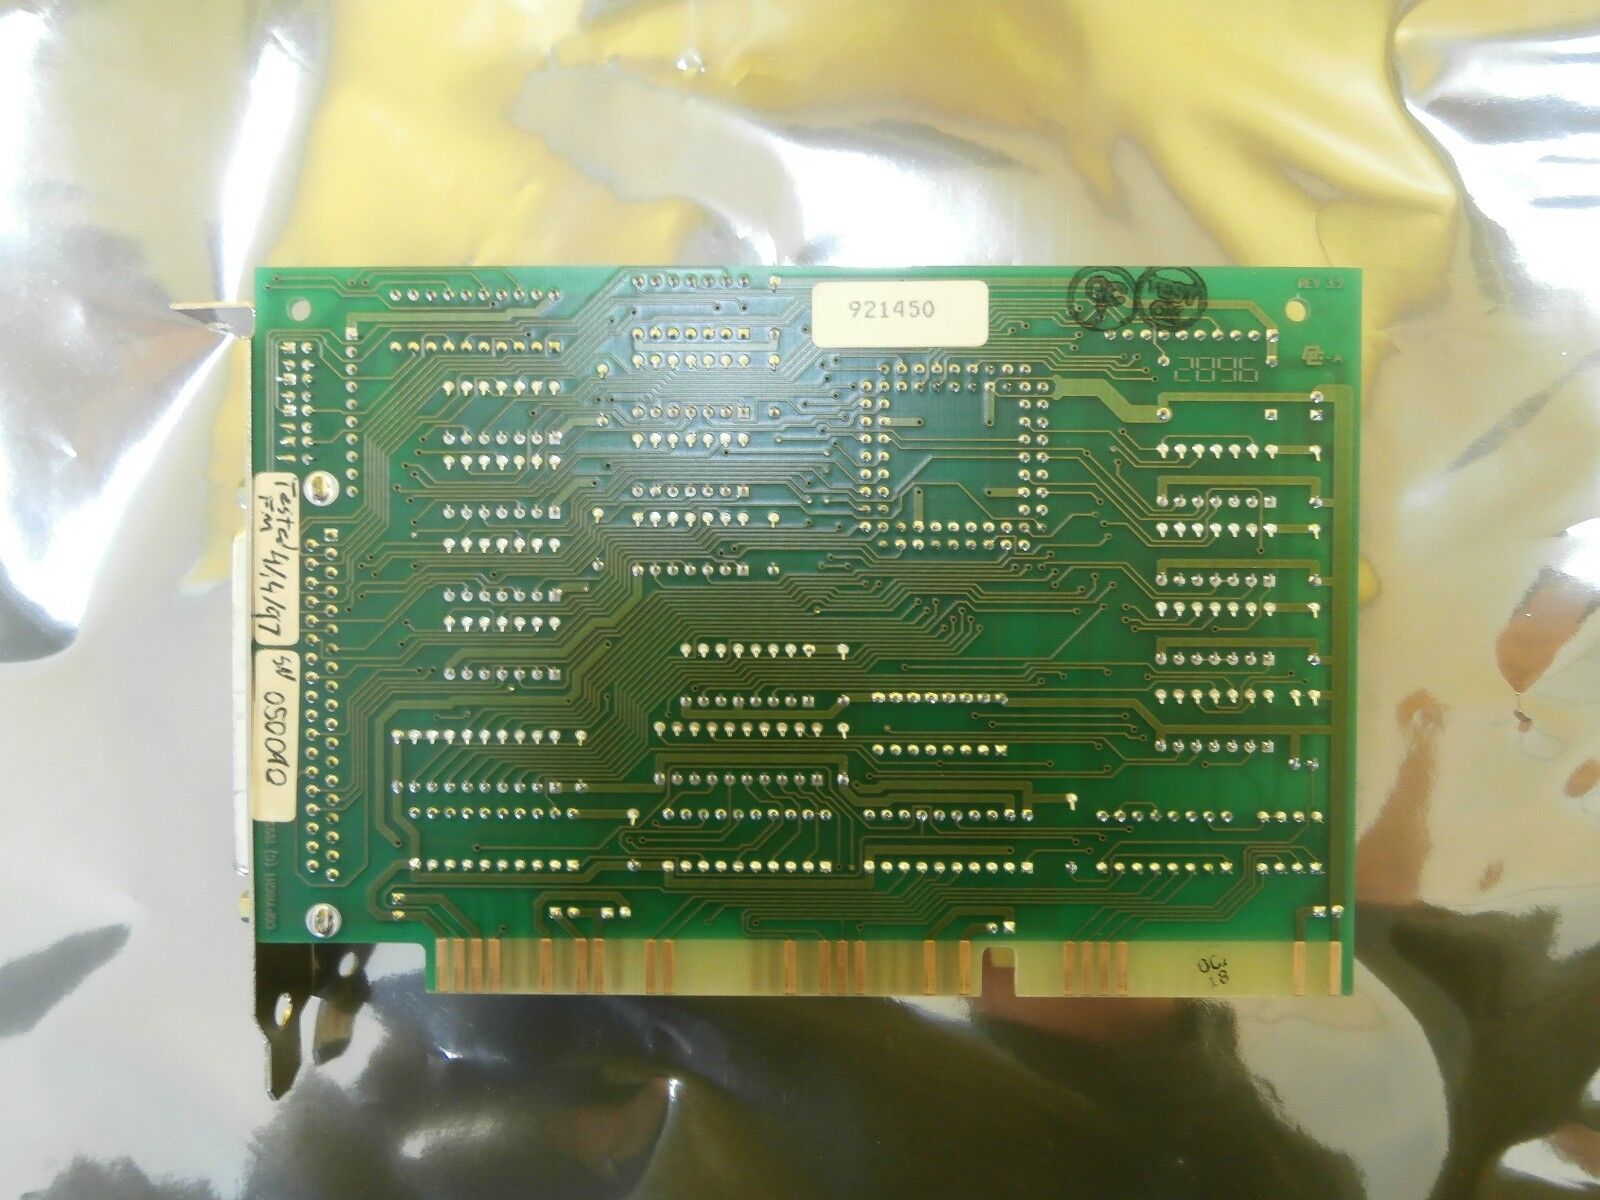 Commtech FASTCOM:4W Four Port RS-232 Adapter PCB Card Used Working